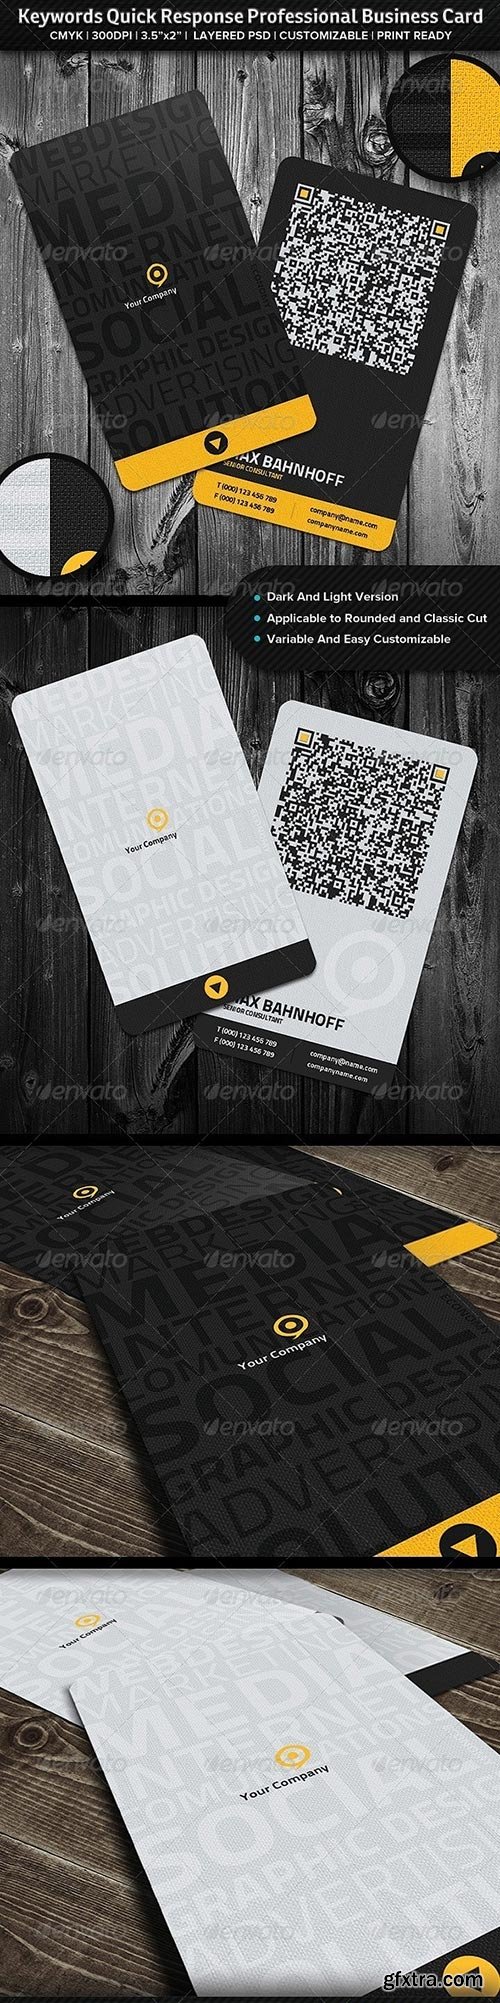 GraphicRiver - Keywords Quick Response Professional Business Card